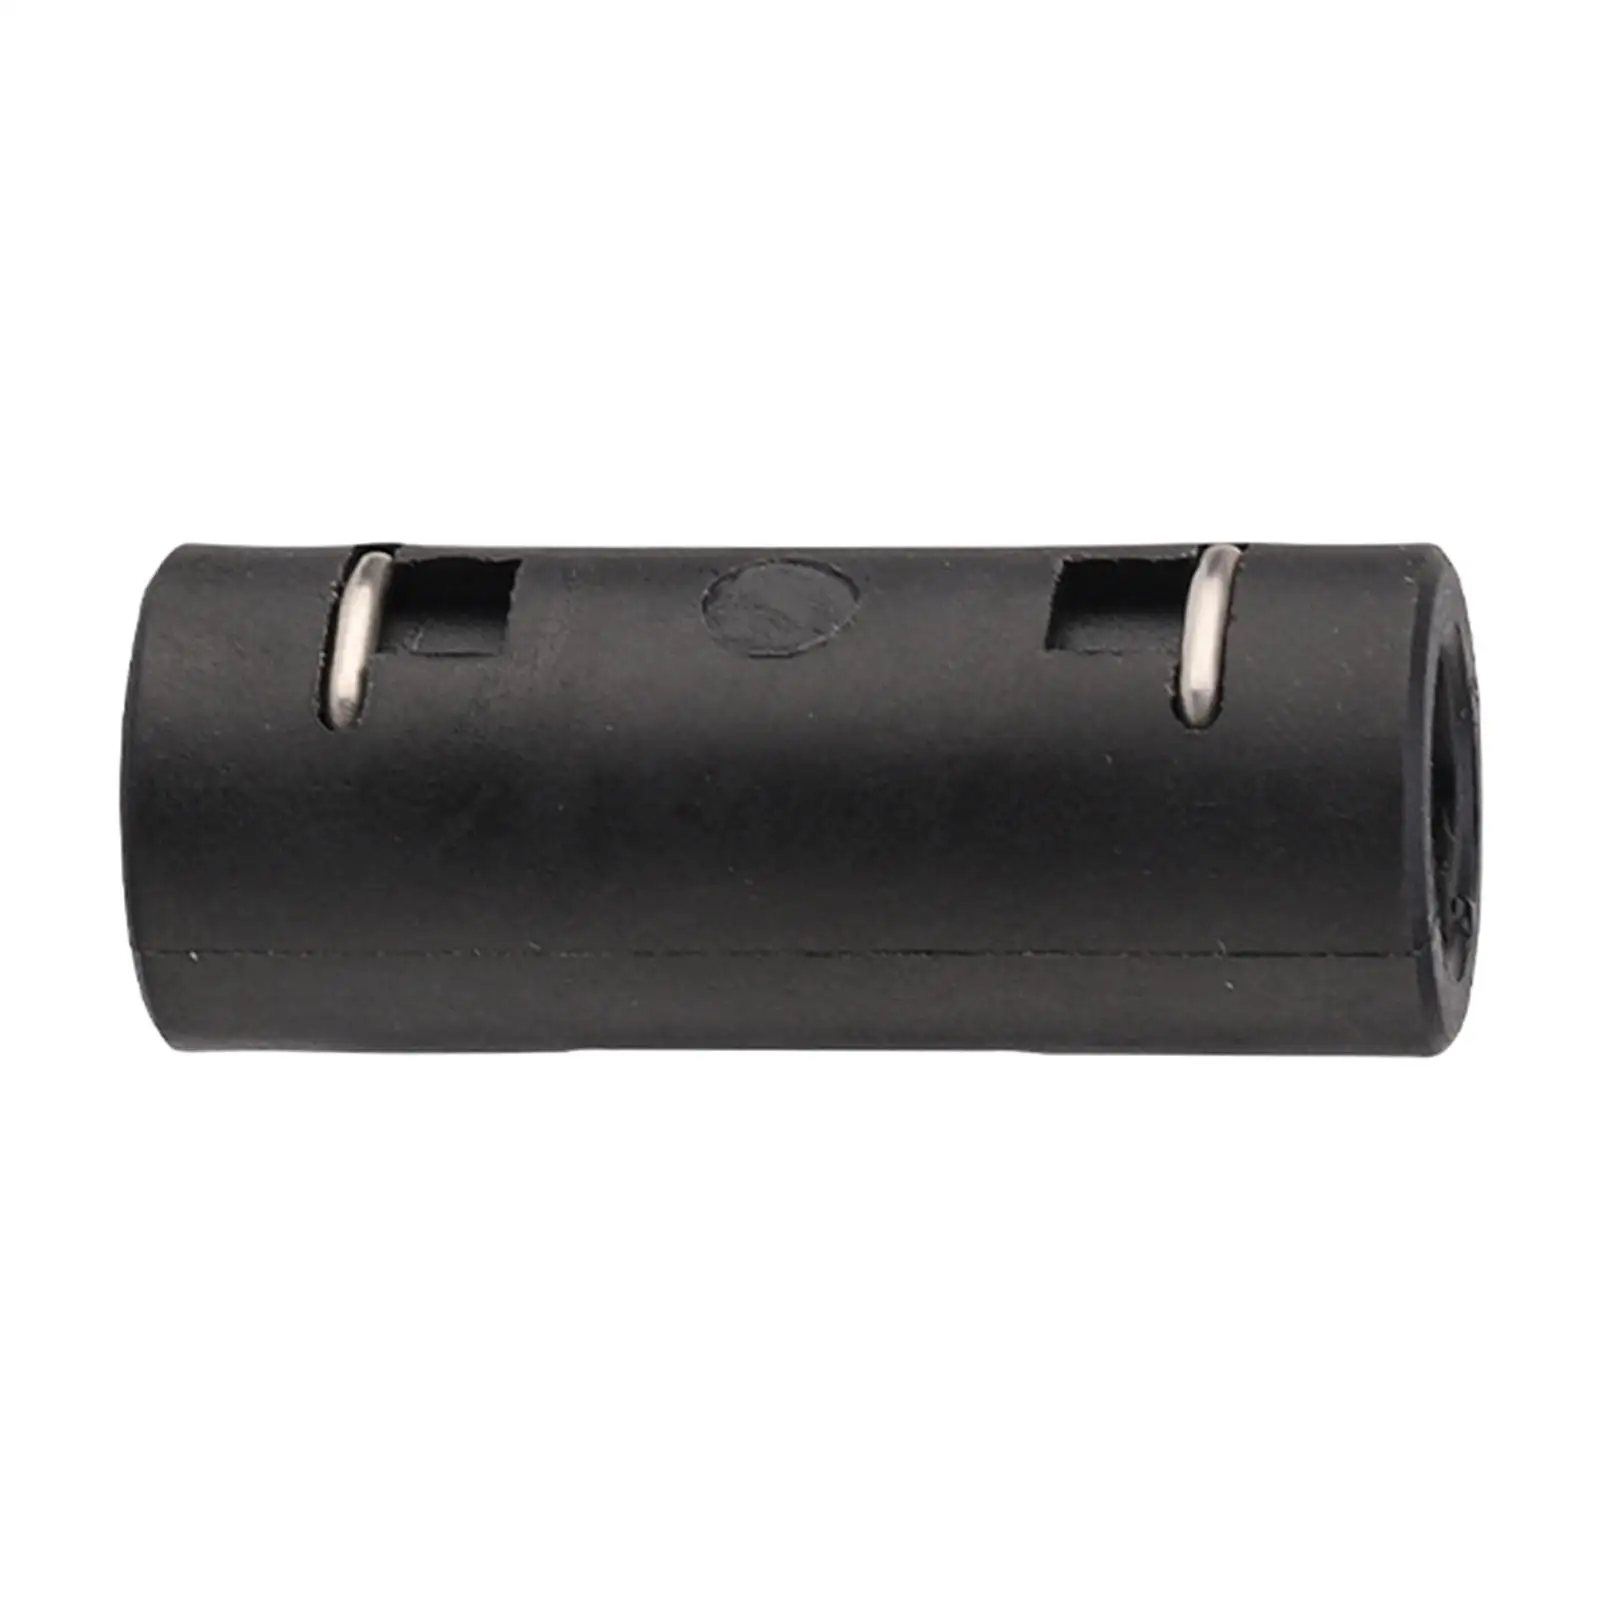 Extension Connector Replace Quick Disconnect Plastic Joint Adapter for K Series K7 K2 K5 High Pressure Washer Hose